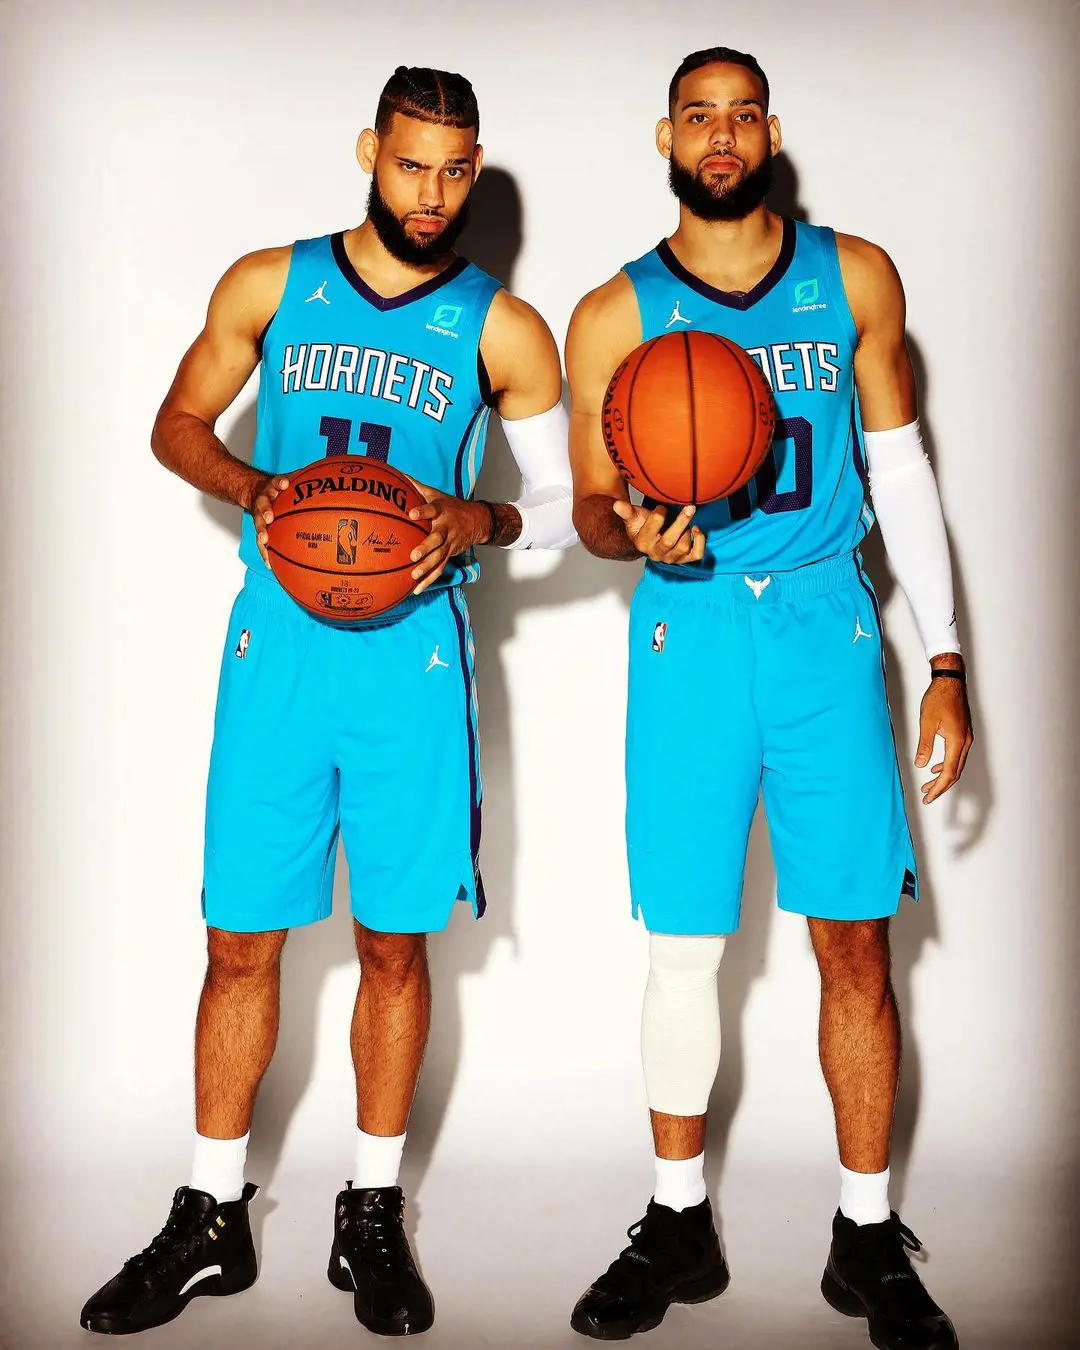 Both Cody and Caleb Martin used to play for the Hornets 